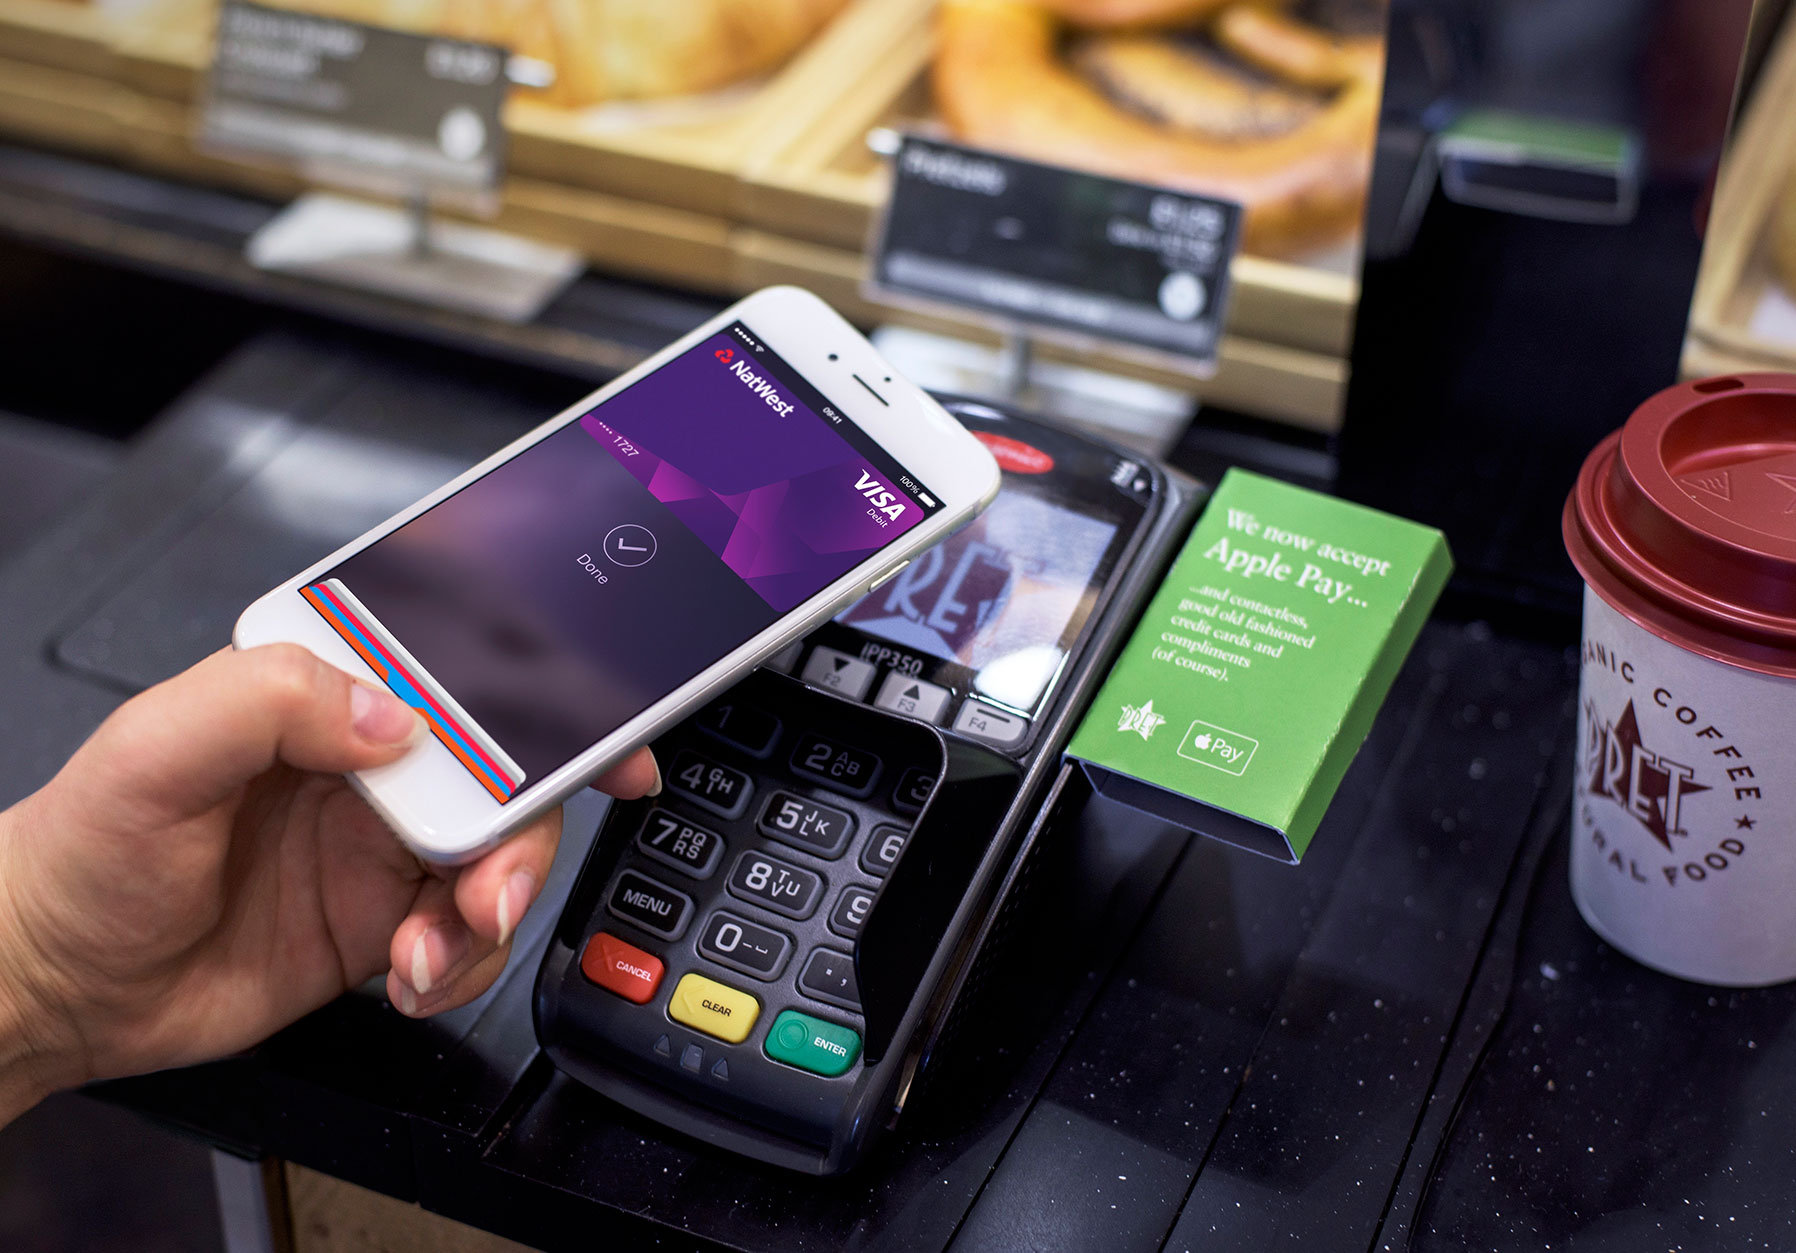 Pret A Manger Hints At Imminent Android Pay Launch in UK